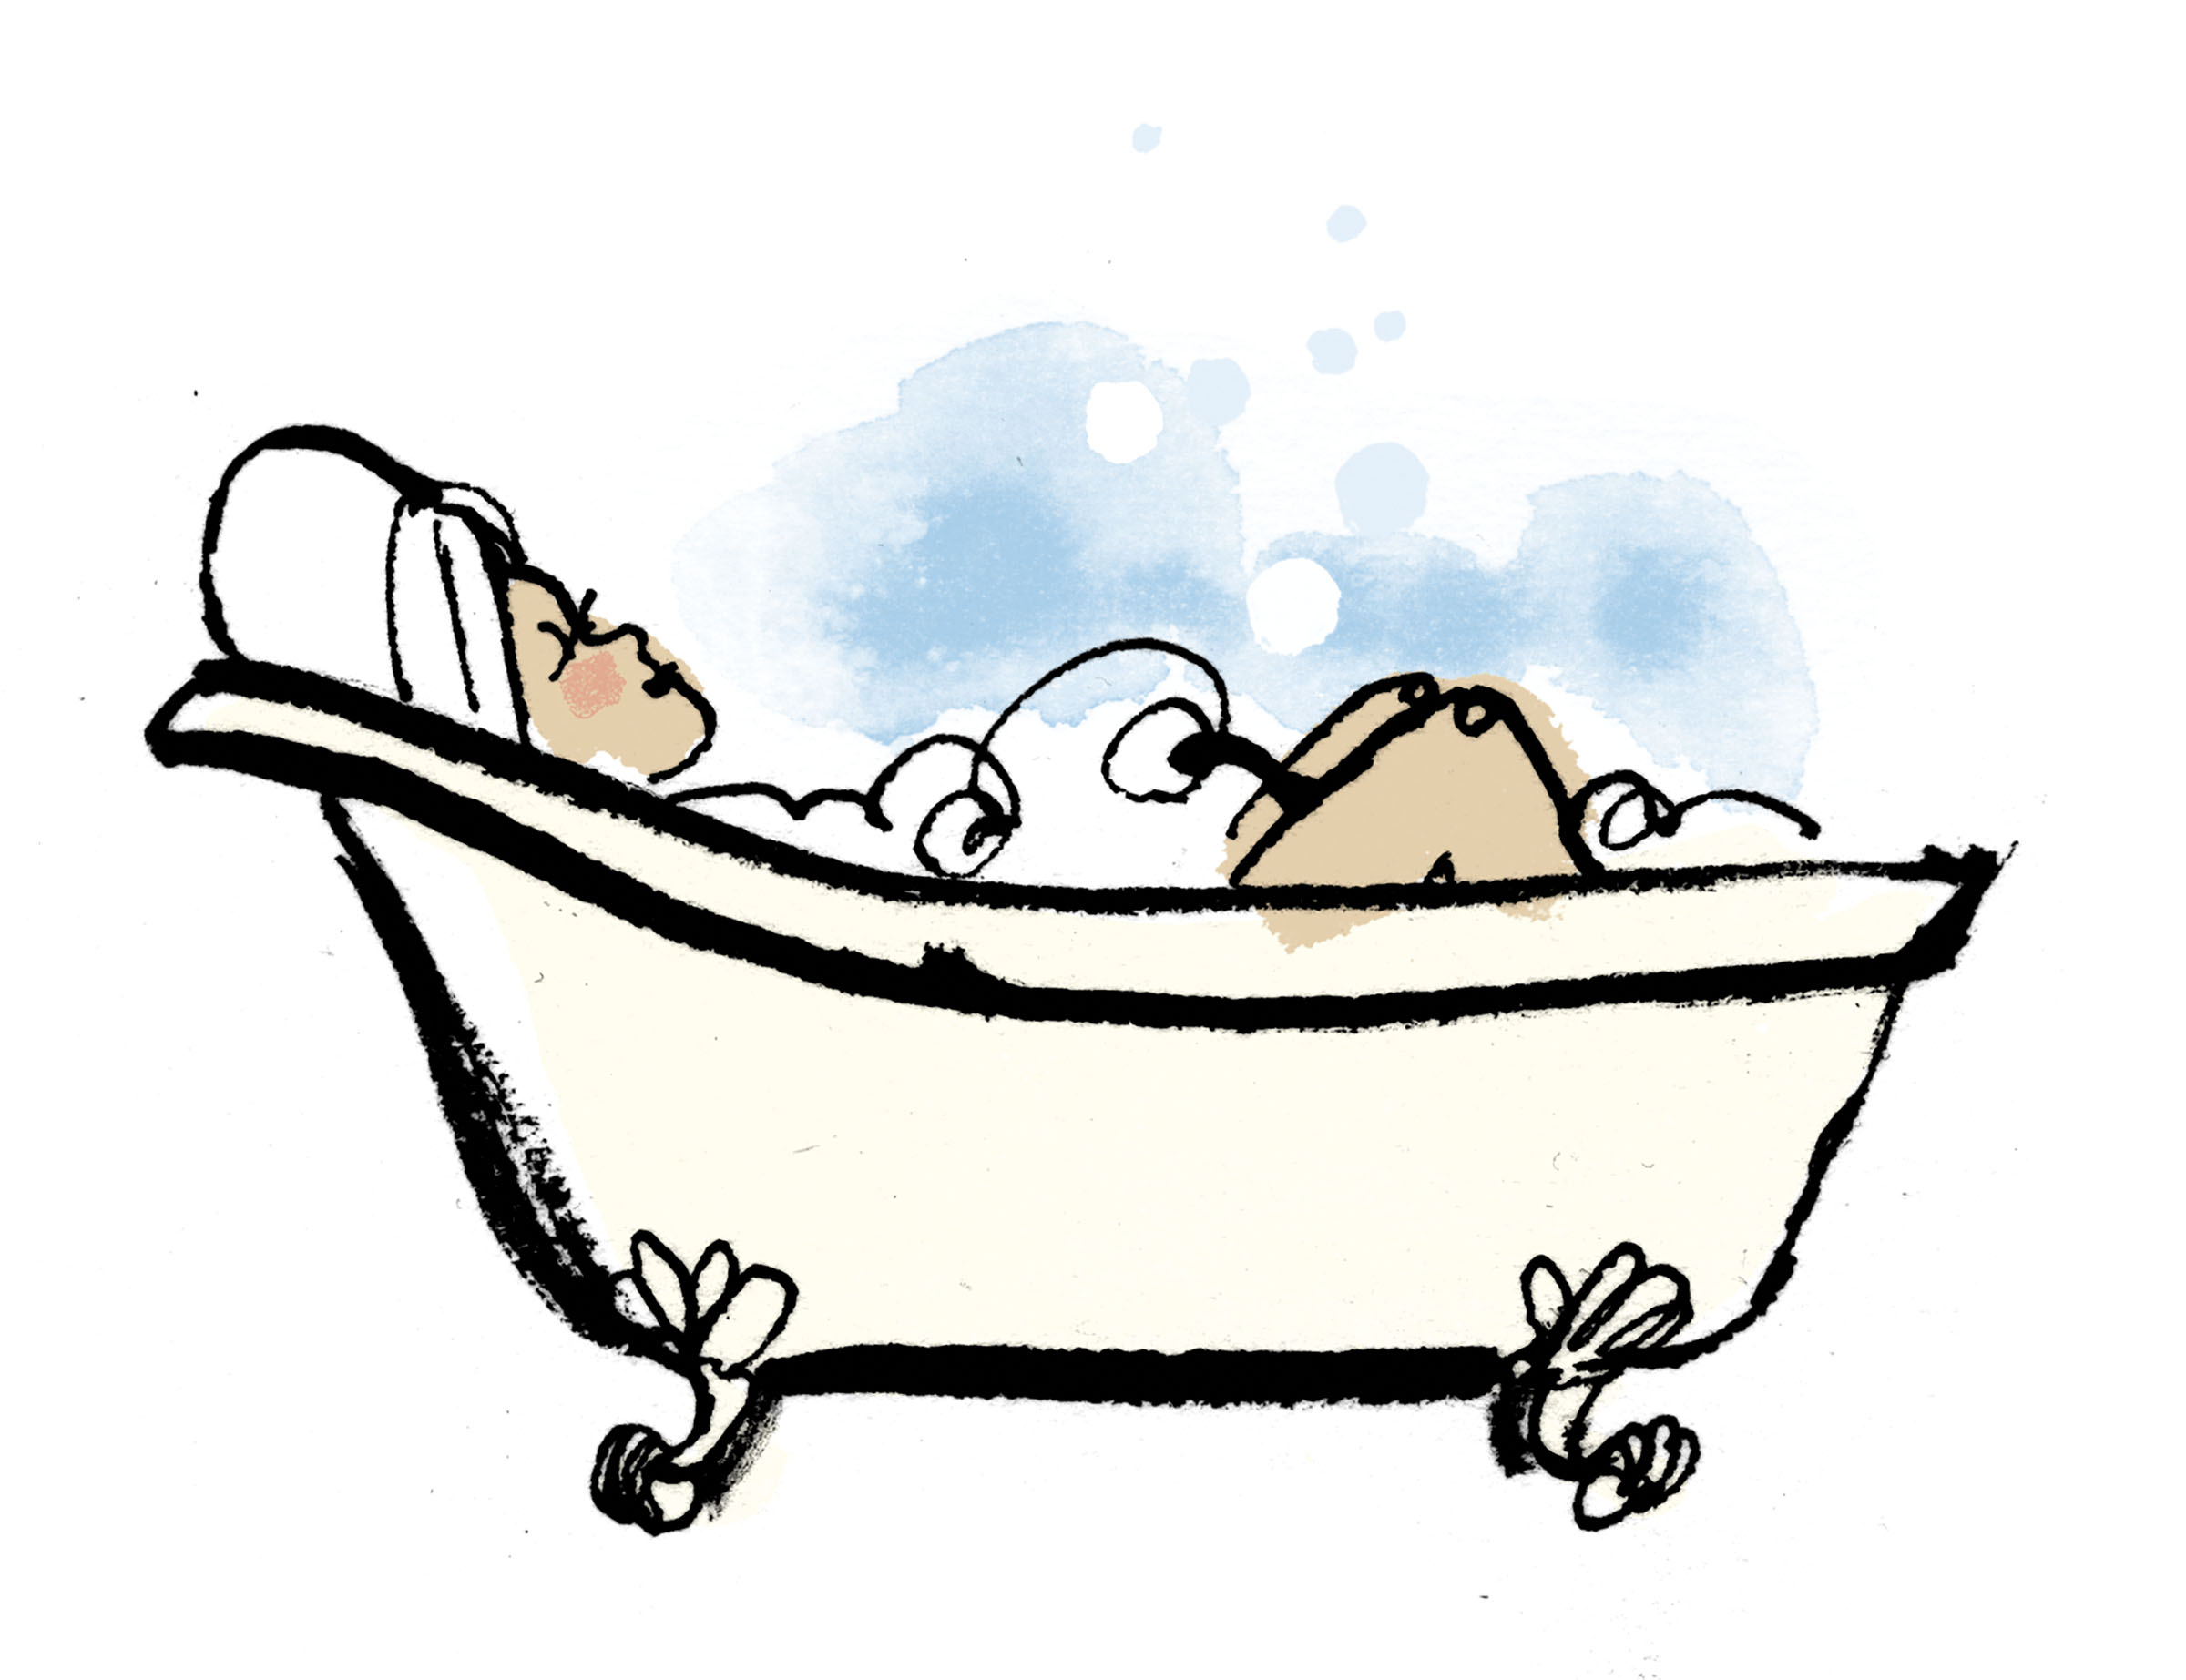 An illustration of a person relaxing in a claw-foot bathtub